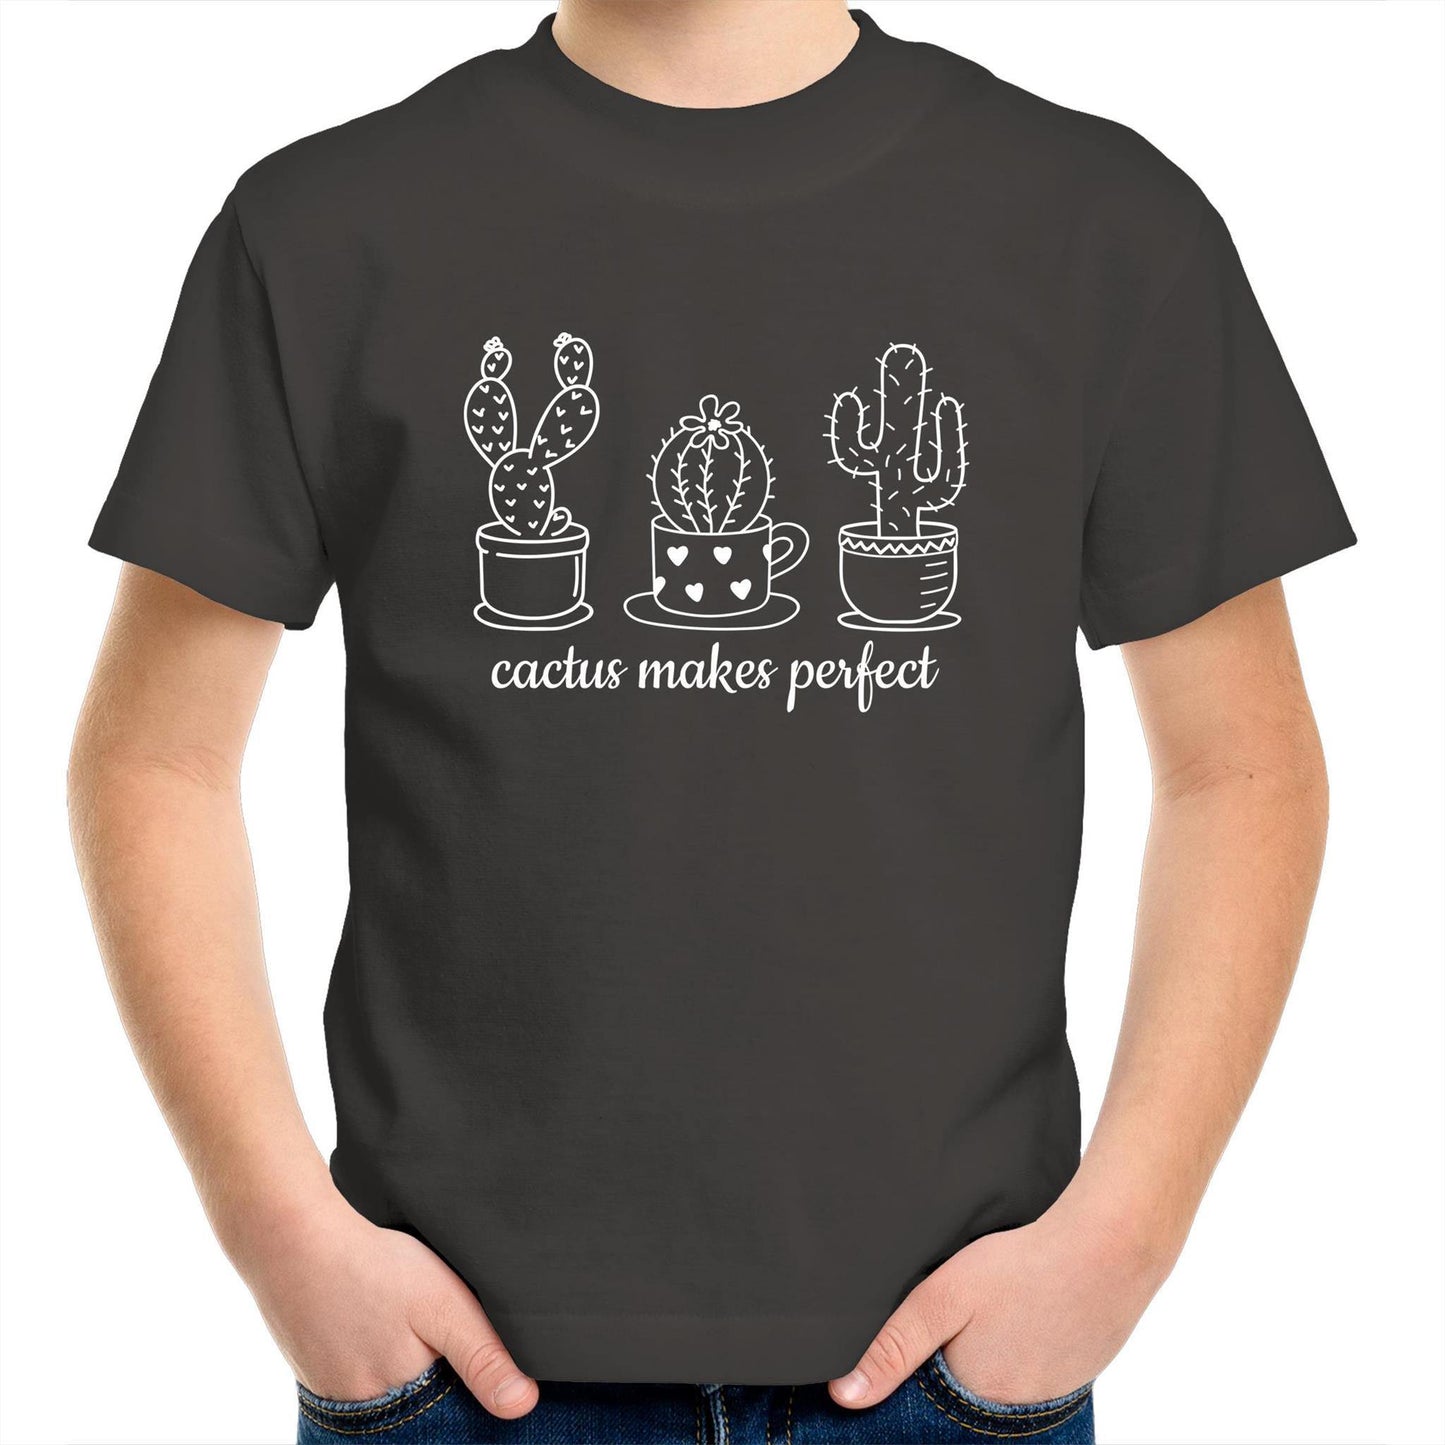 Cactus Makes Perfect - Kids Youth Crew T-Shirt Charcoal Kids Youth T-shirt Plants